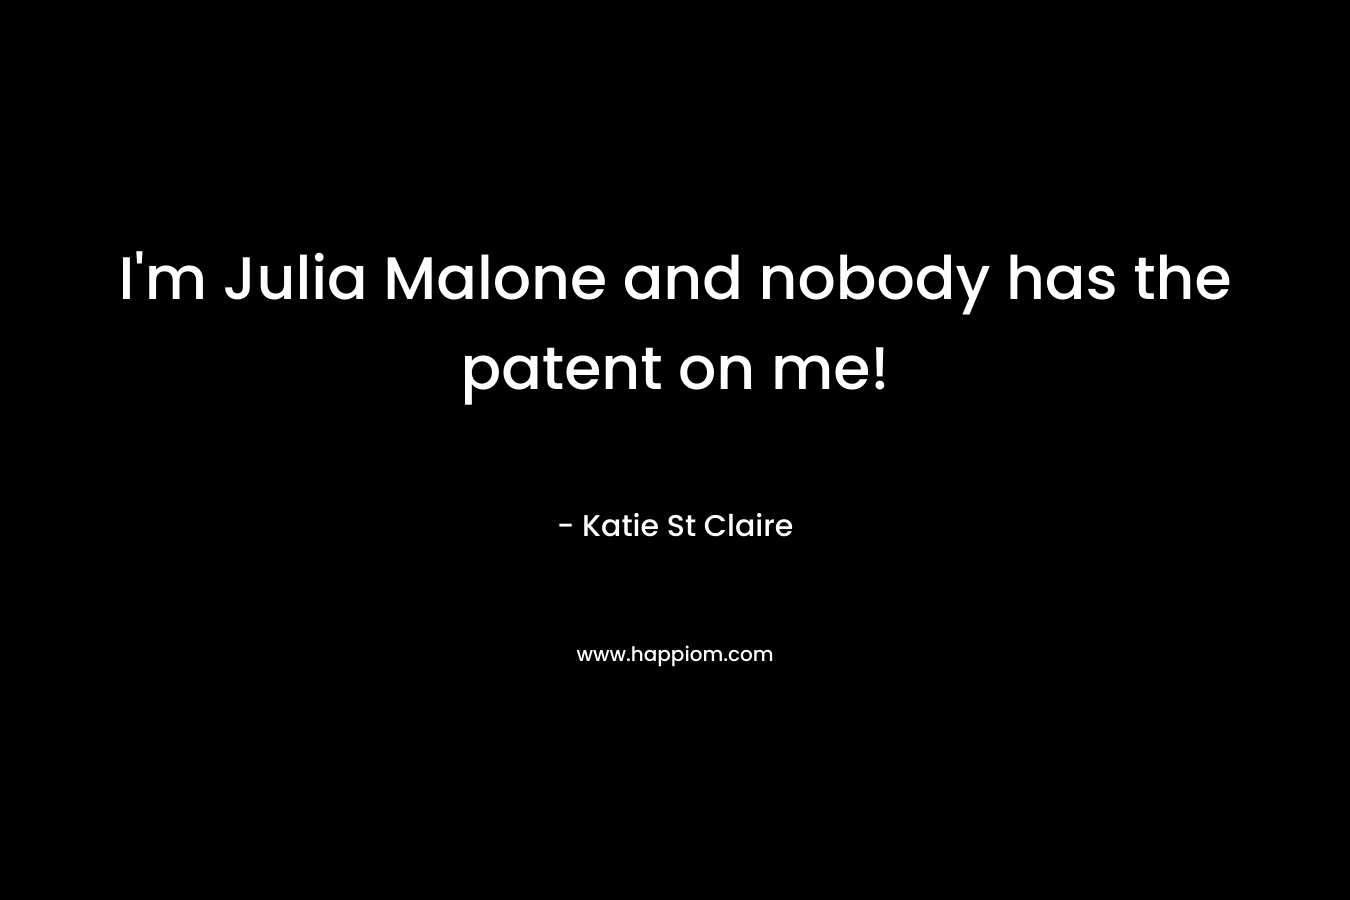 I’m Julia Malone and nobody has the patent on me! – Katie St Claire